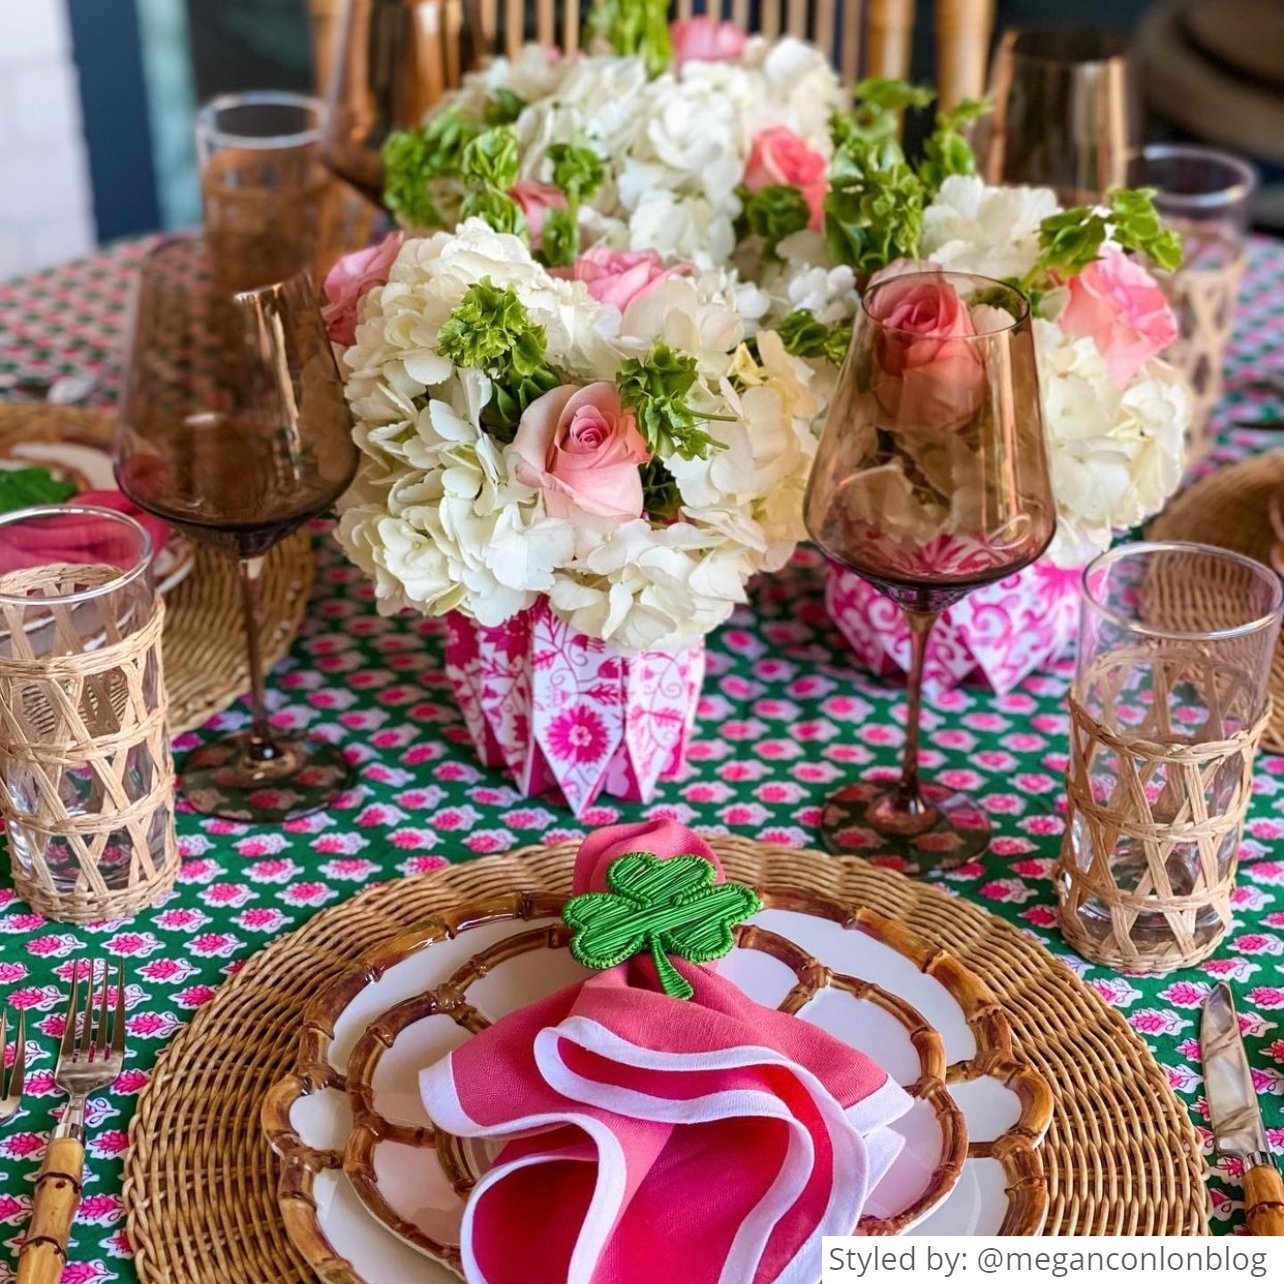 Table setting with a pink chinoiserie paper vase and pink napkin